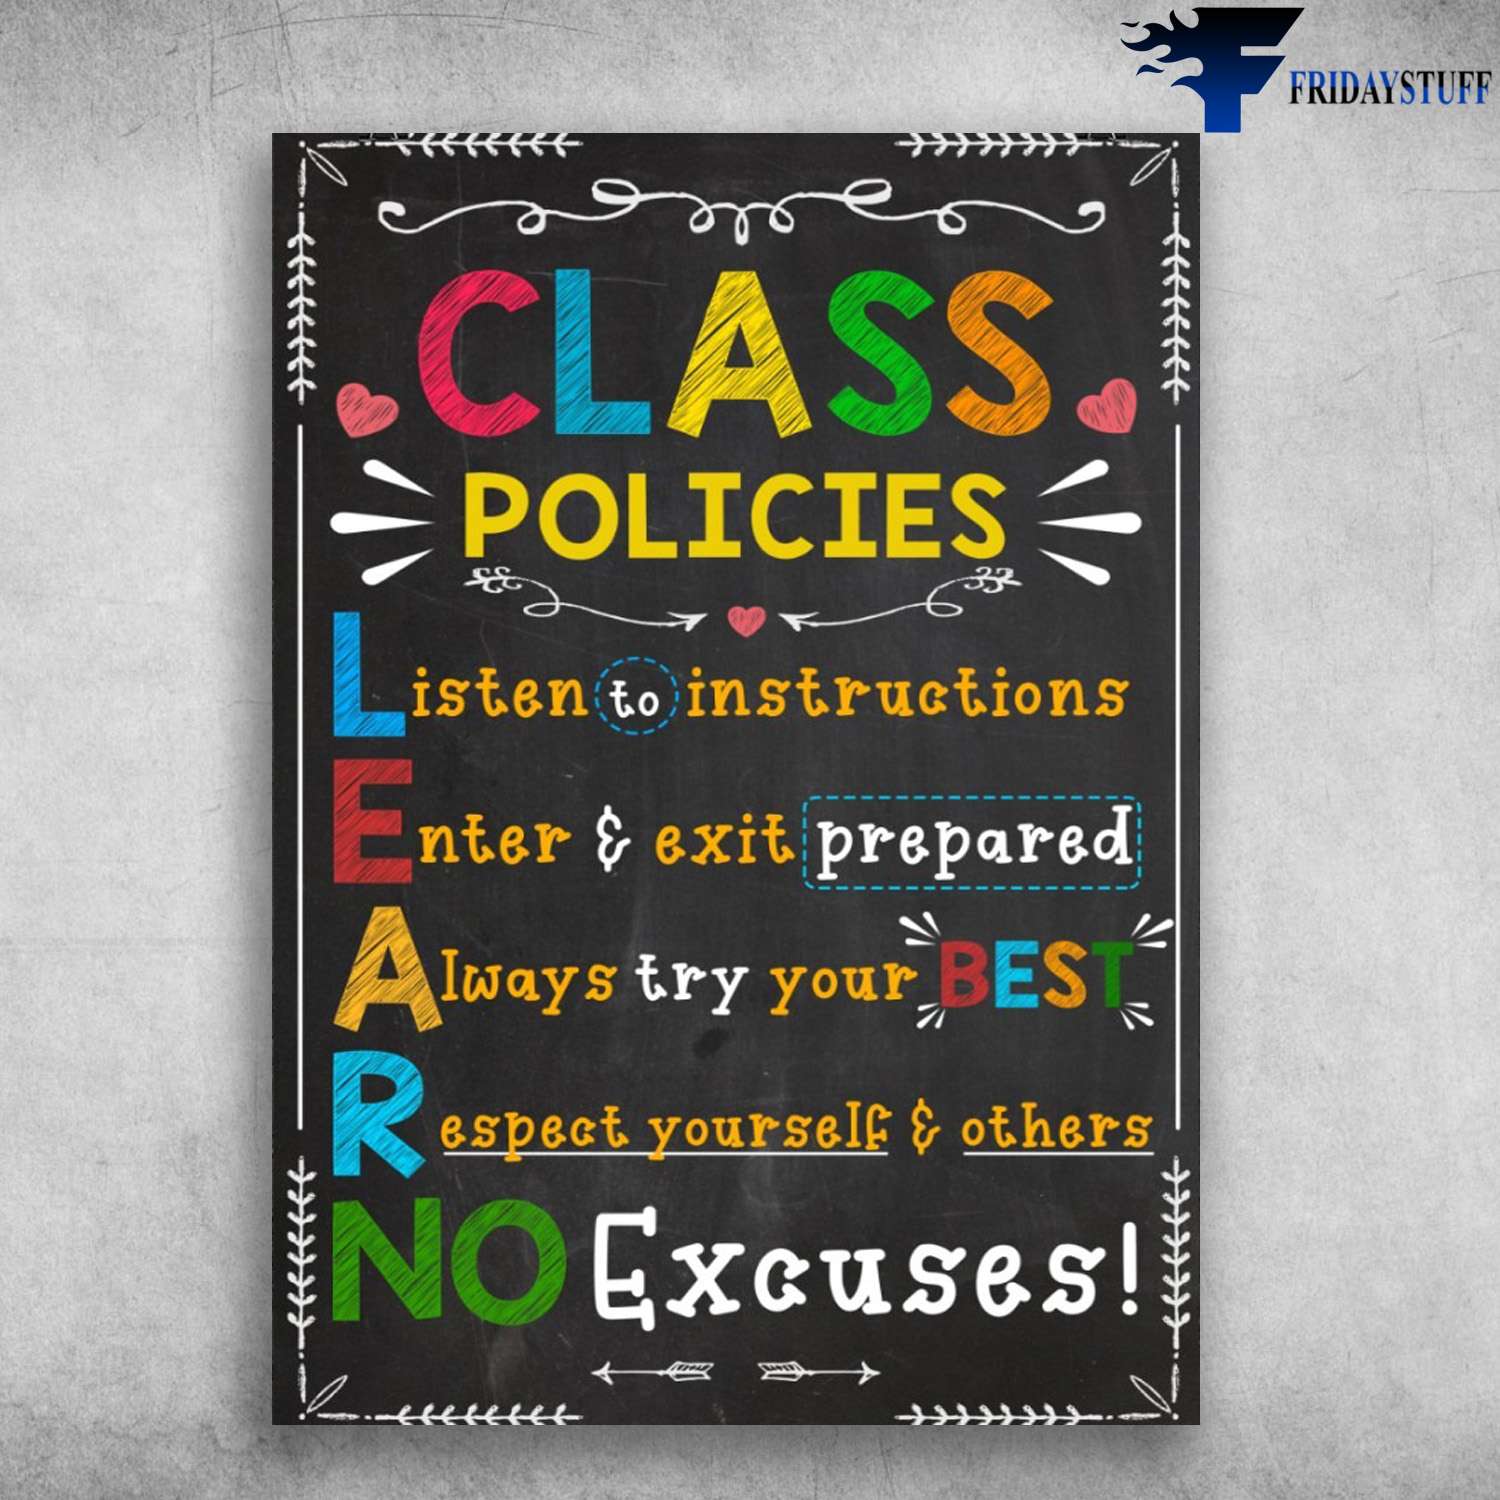 Class Policies - Listen To Instructions, Enter And Exit Prepared, Always Try Your Best, Respect Your Self And Others, No Excuses